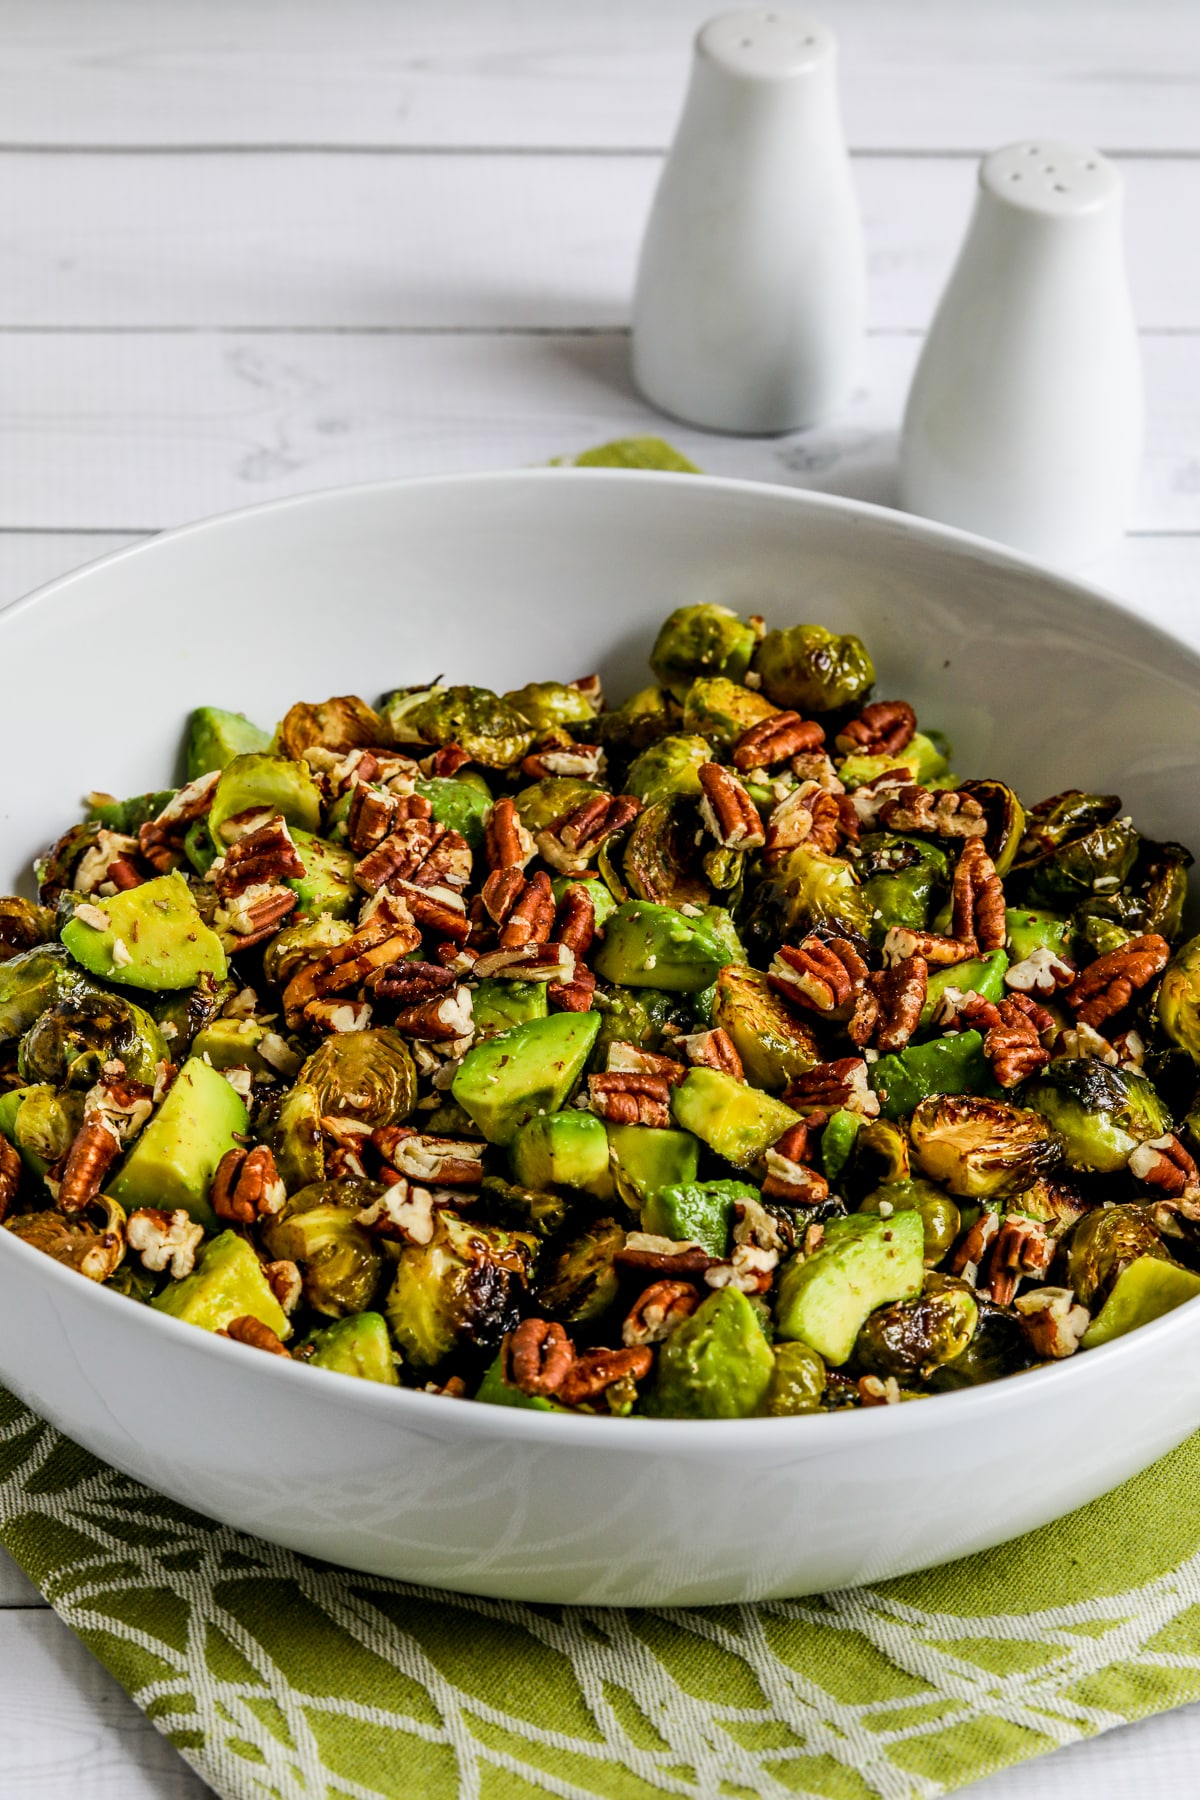 Roasted Brussels Sprouts with Avocado and Walnuts Arranged in Serving Bowl on a Green-White Napkin